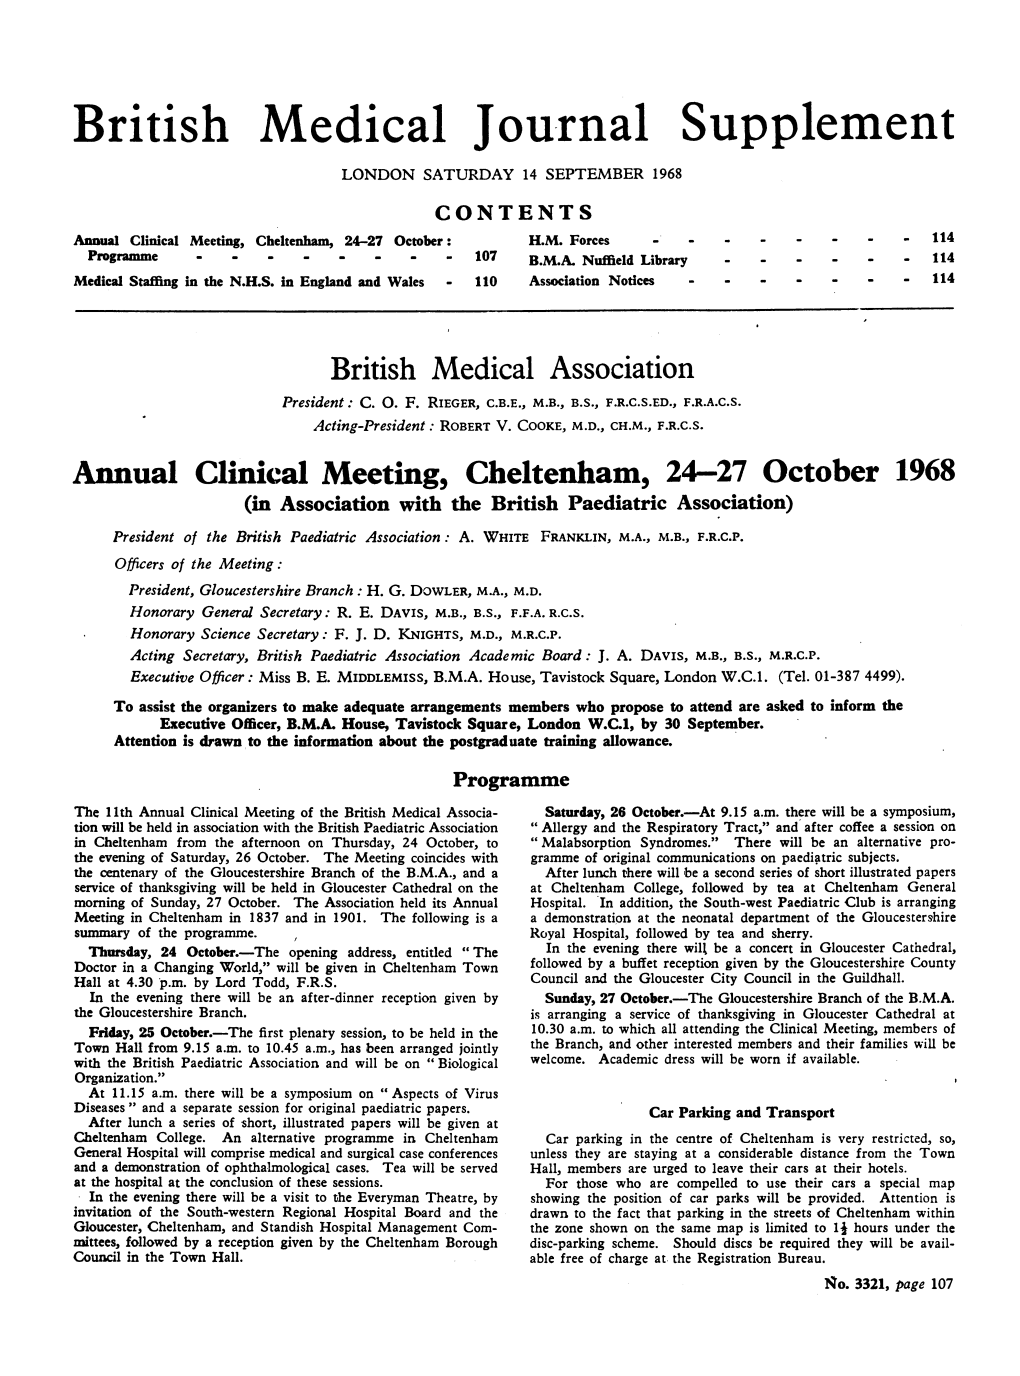 British Medical Jou-Rnal Supplement LONDON SATURDAY 14 SEPTEMBER 1968 CONTENTS Annual Clinical Meeting, Cheltenham, 24-27 October: H.M